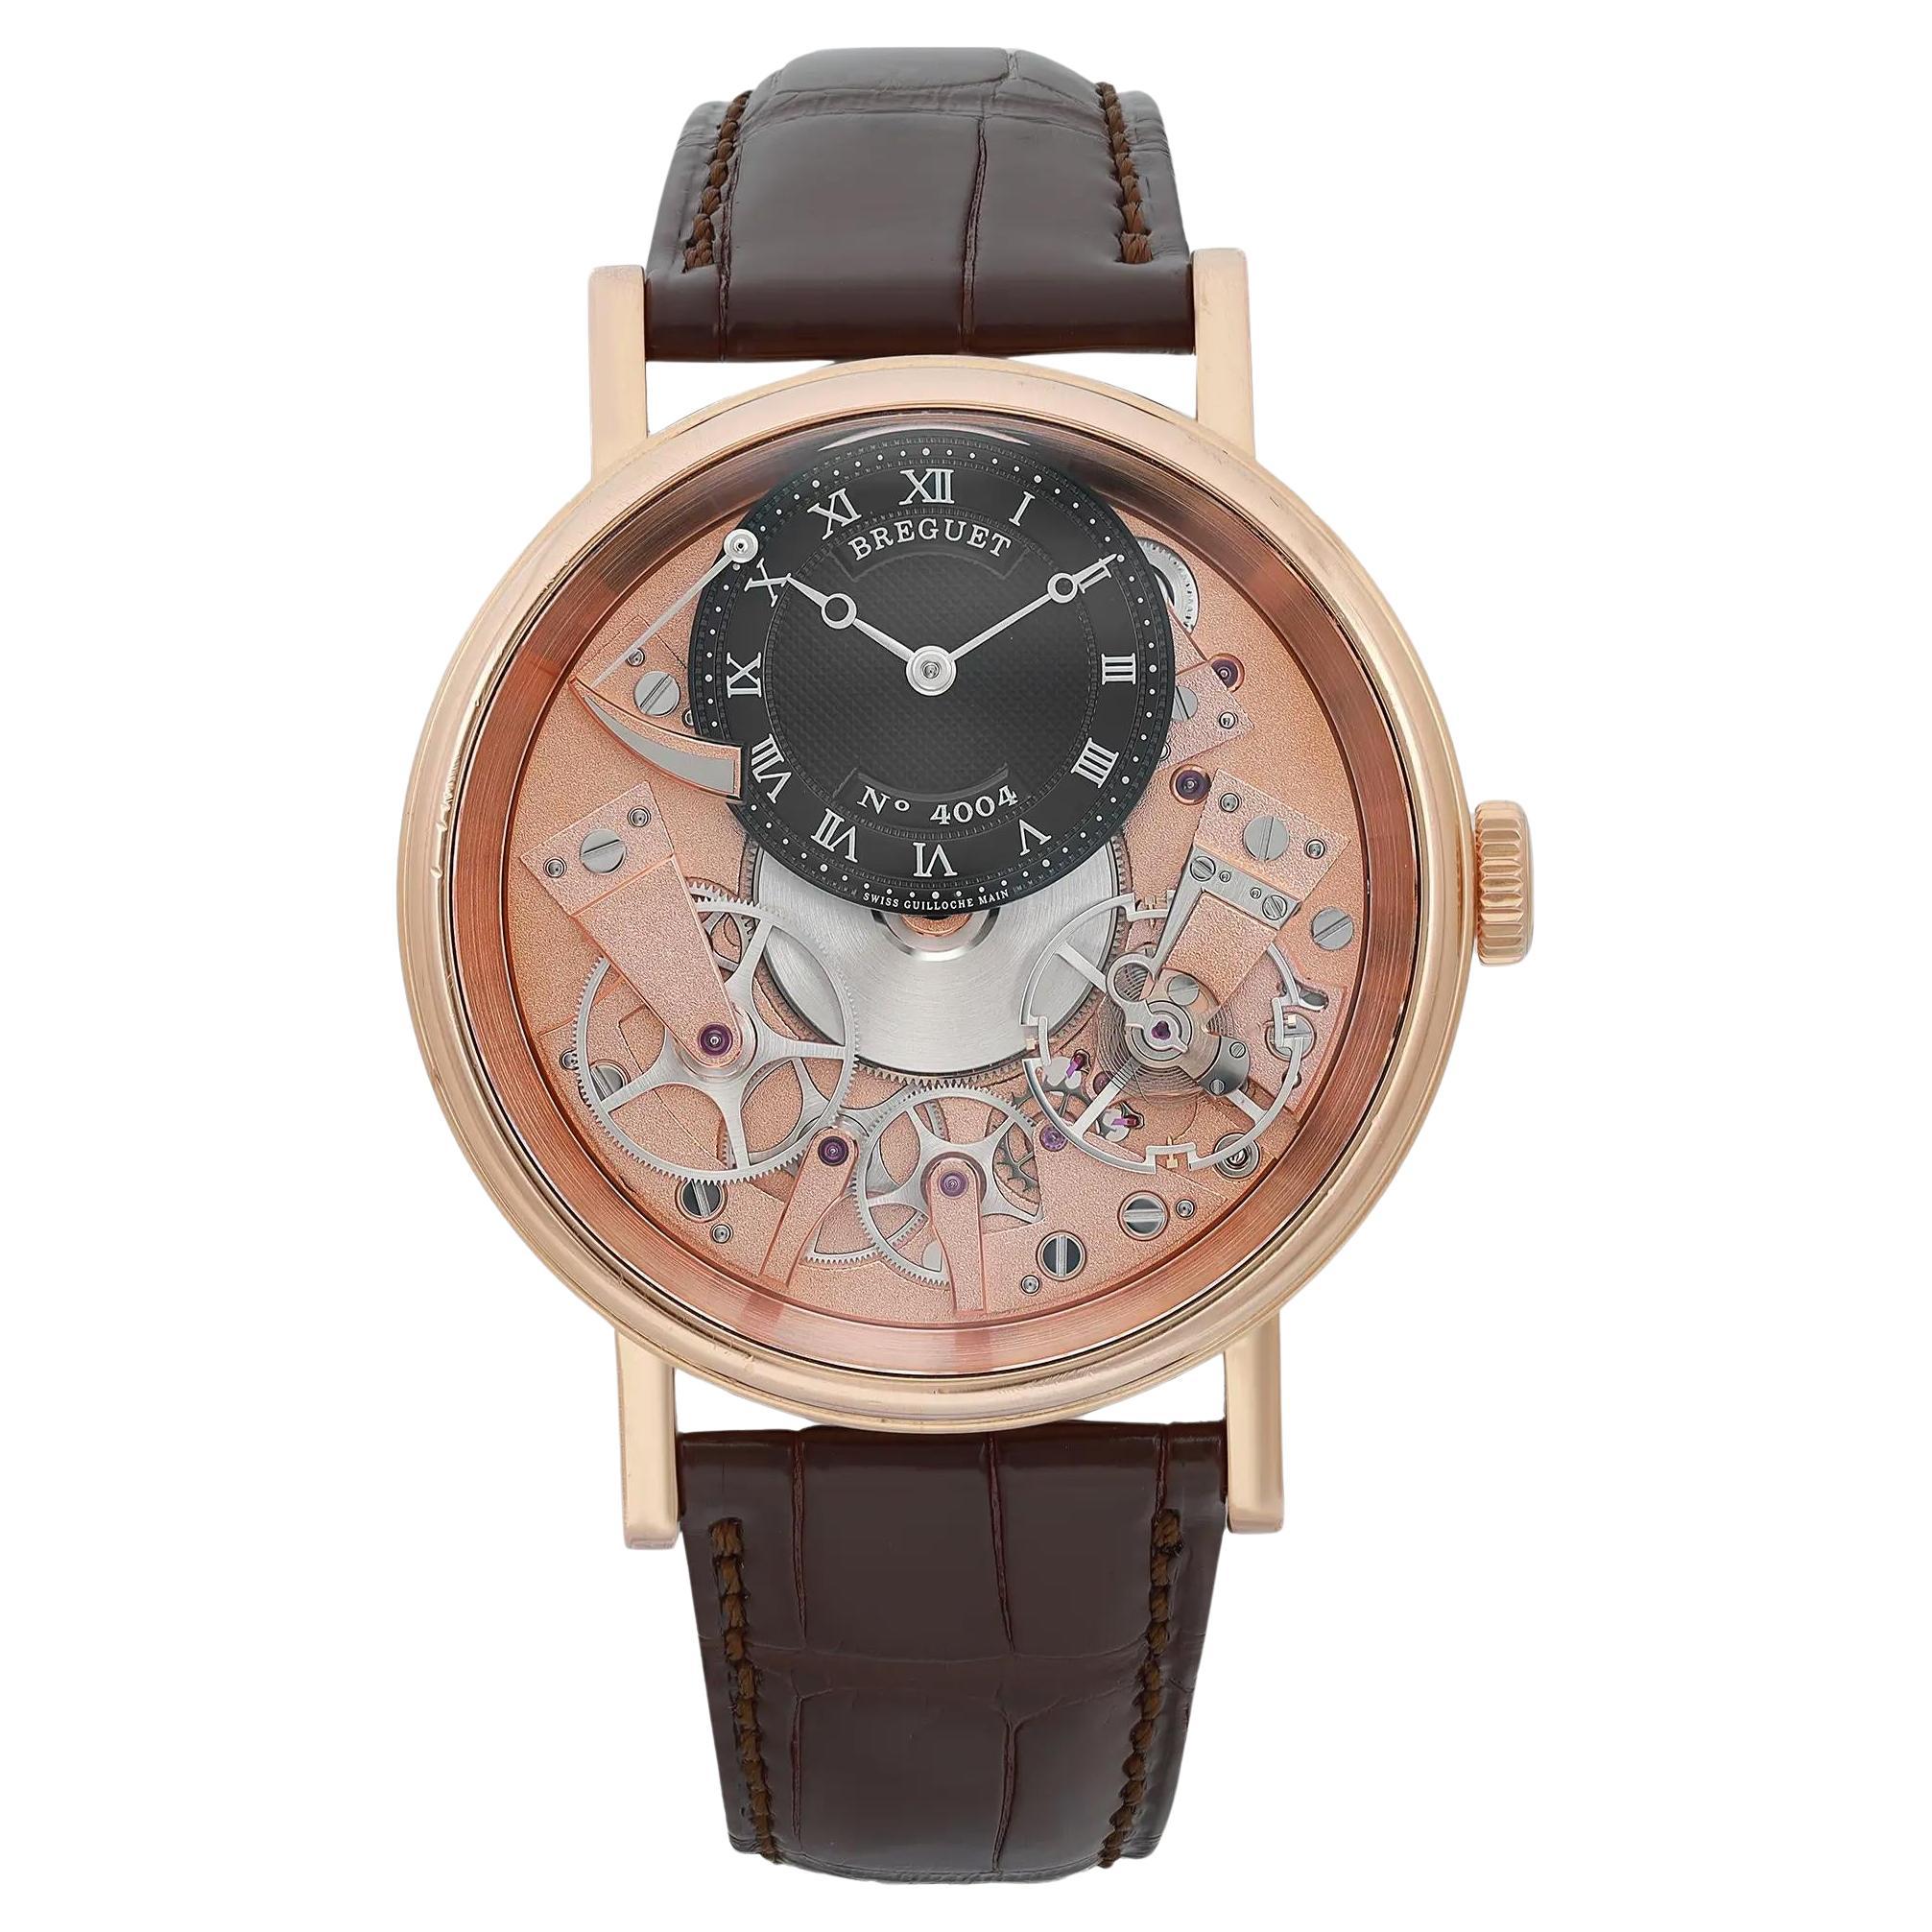 Breguet Tradition 18K Gold Skeleton Dial Manual Wind Mens Watch 7057BR/R9/9W6